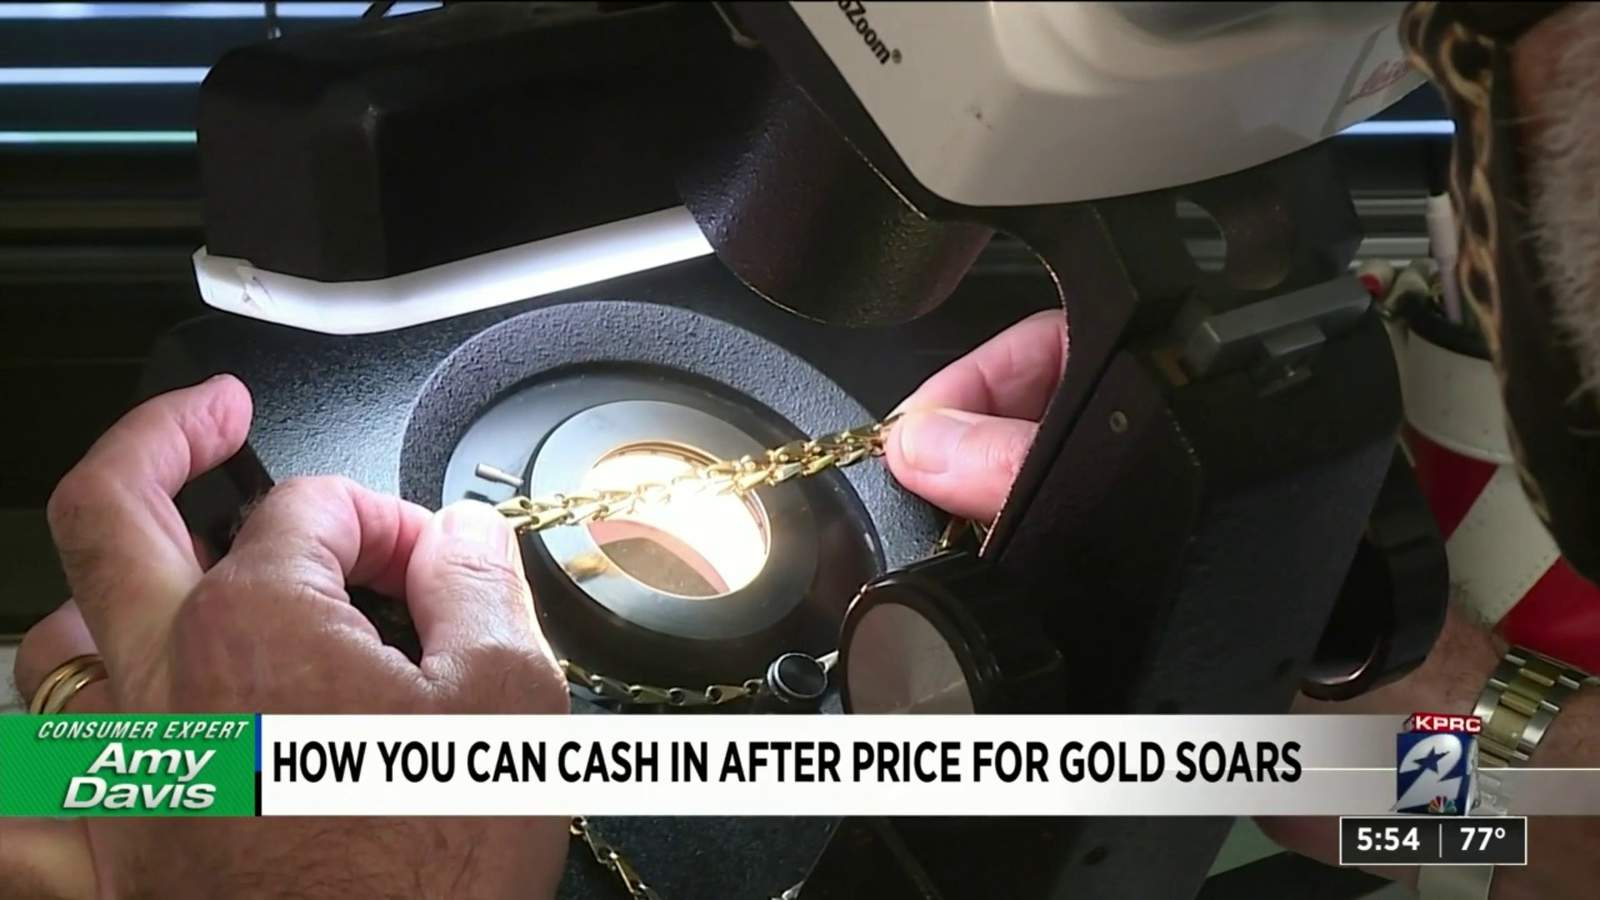 How you can cash in after price for gold soars